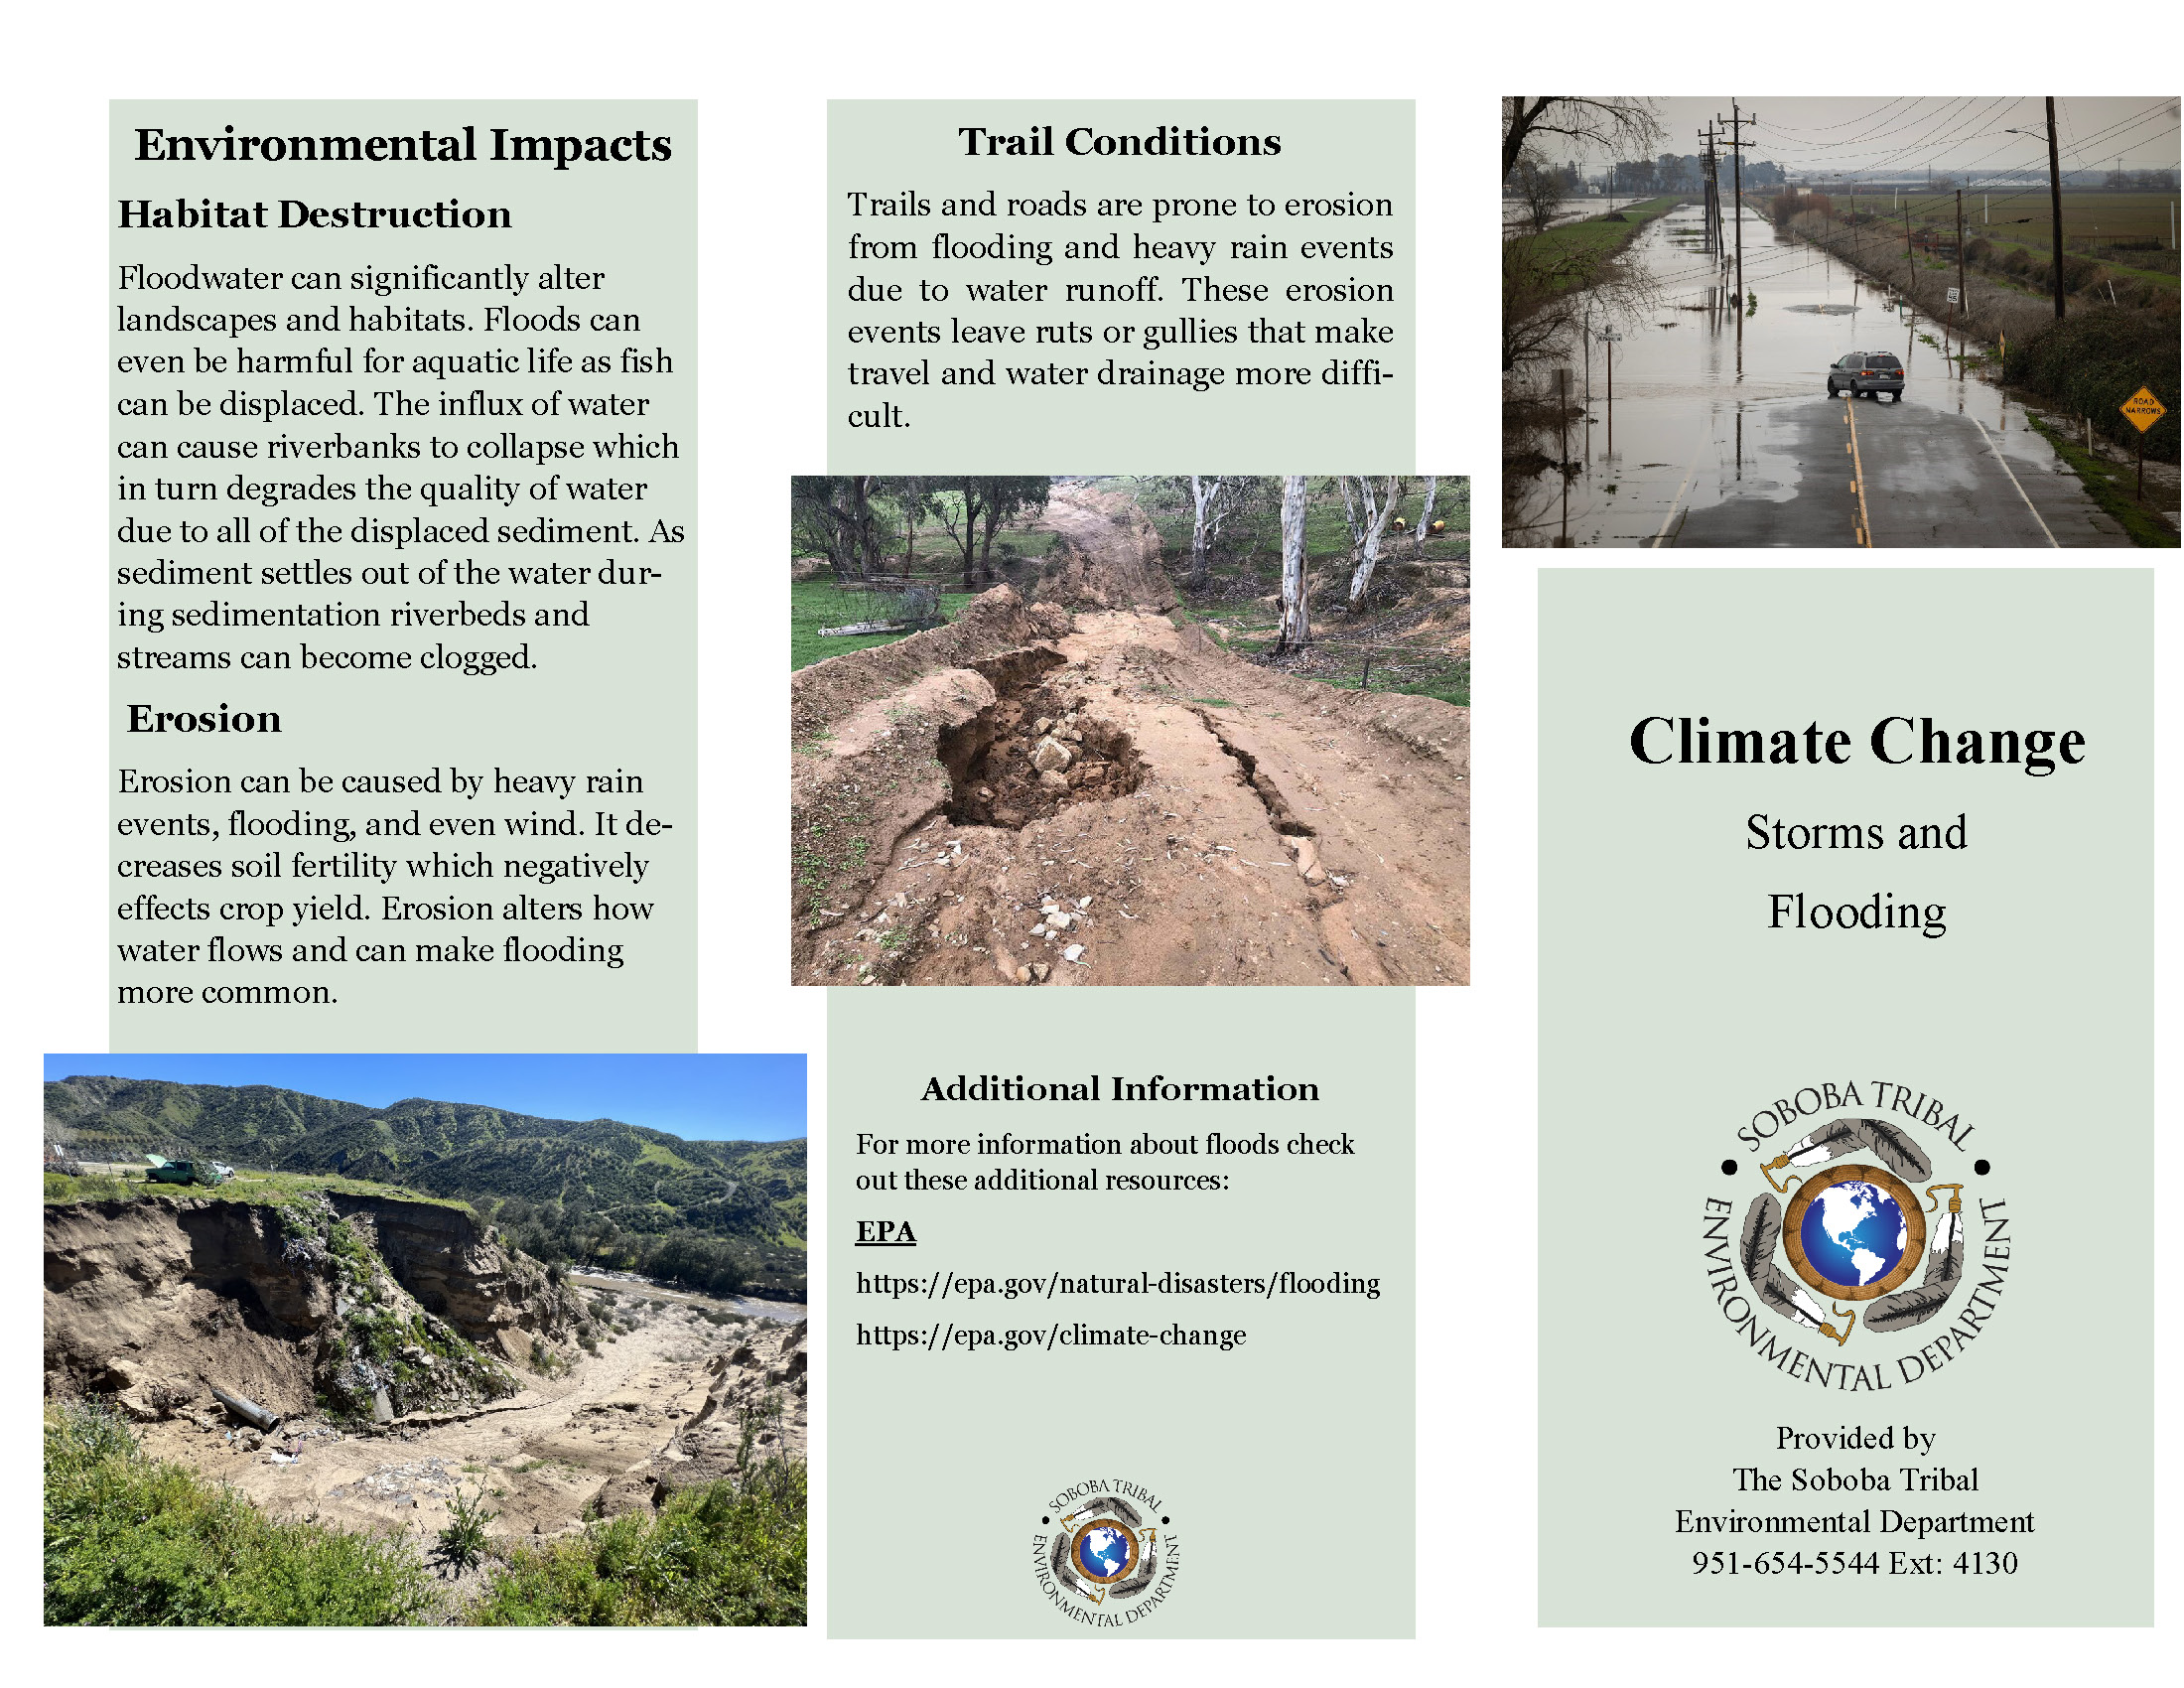 Climate Change - Storms and Flooding